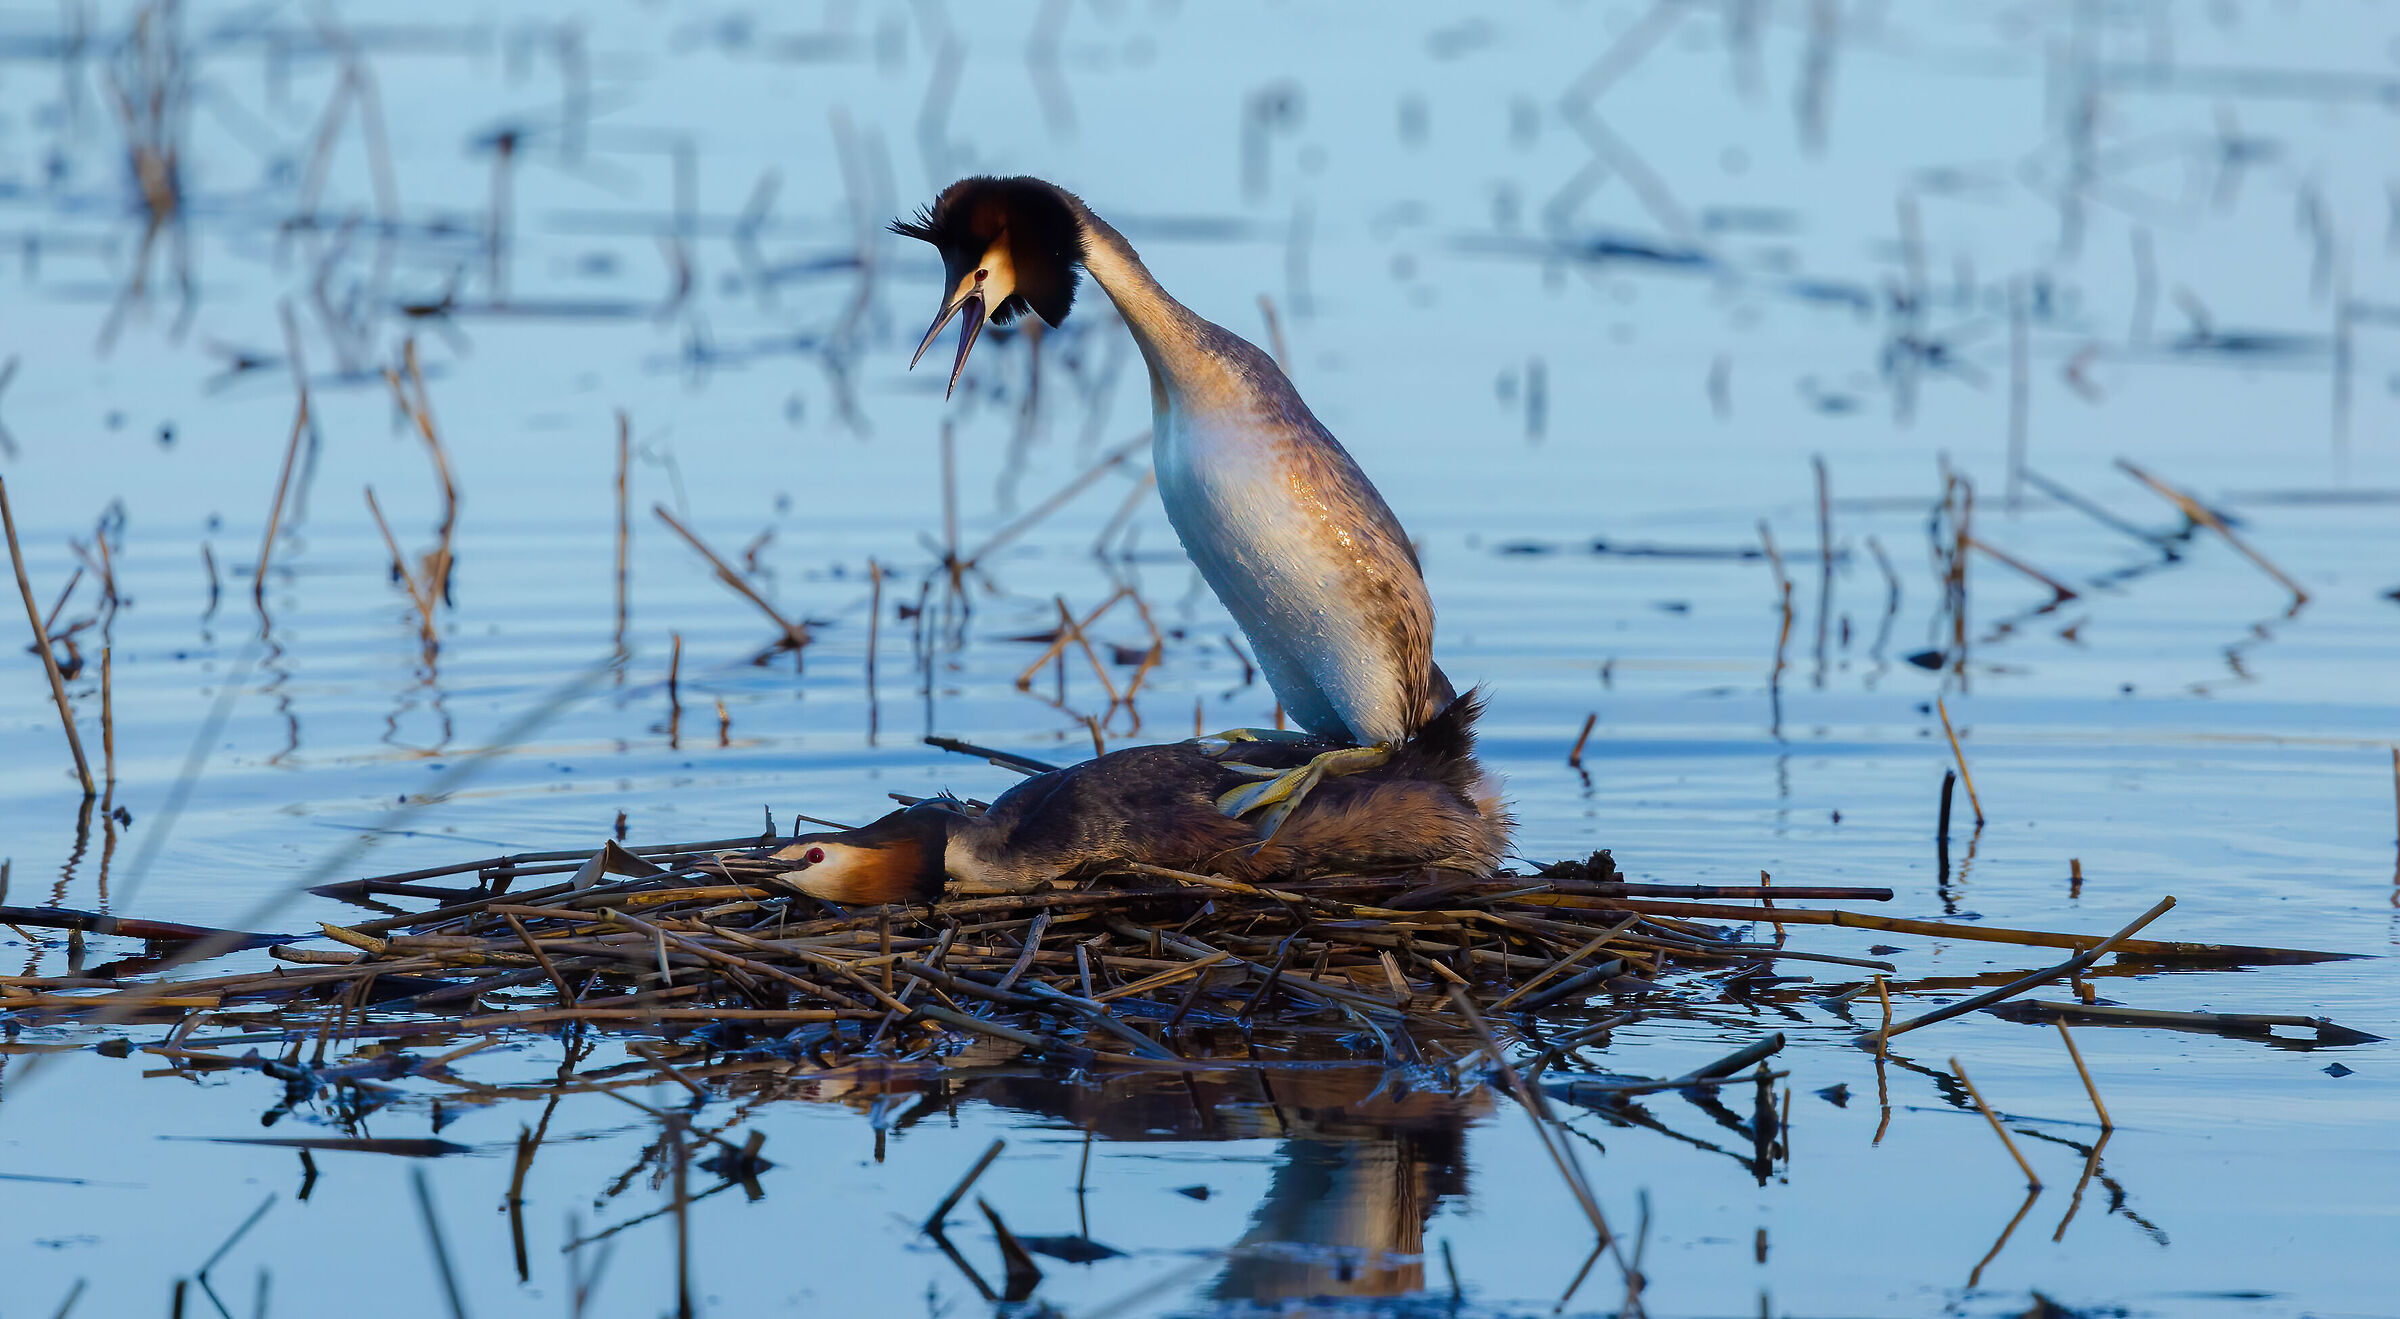 The grebes in love...